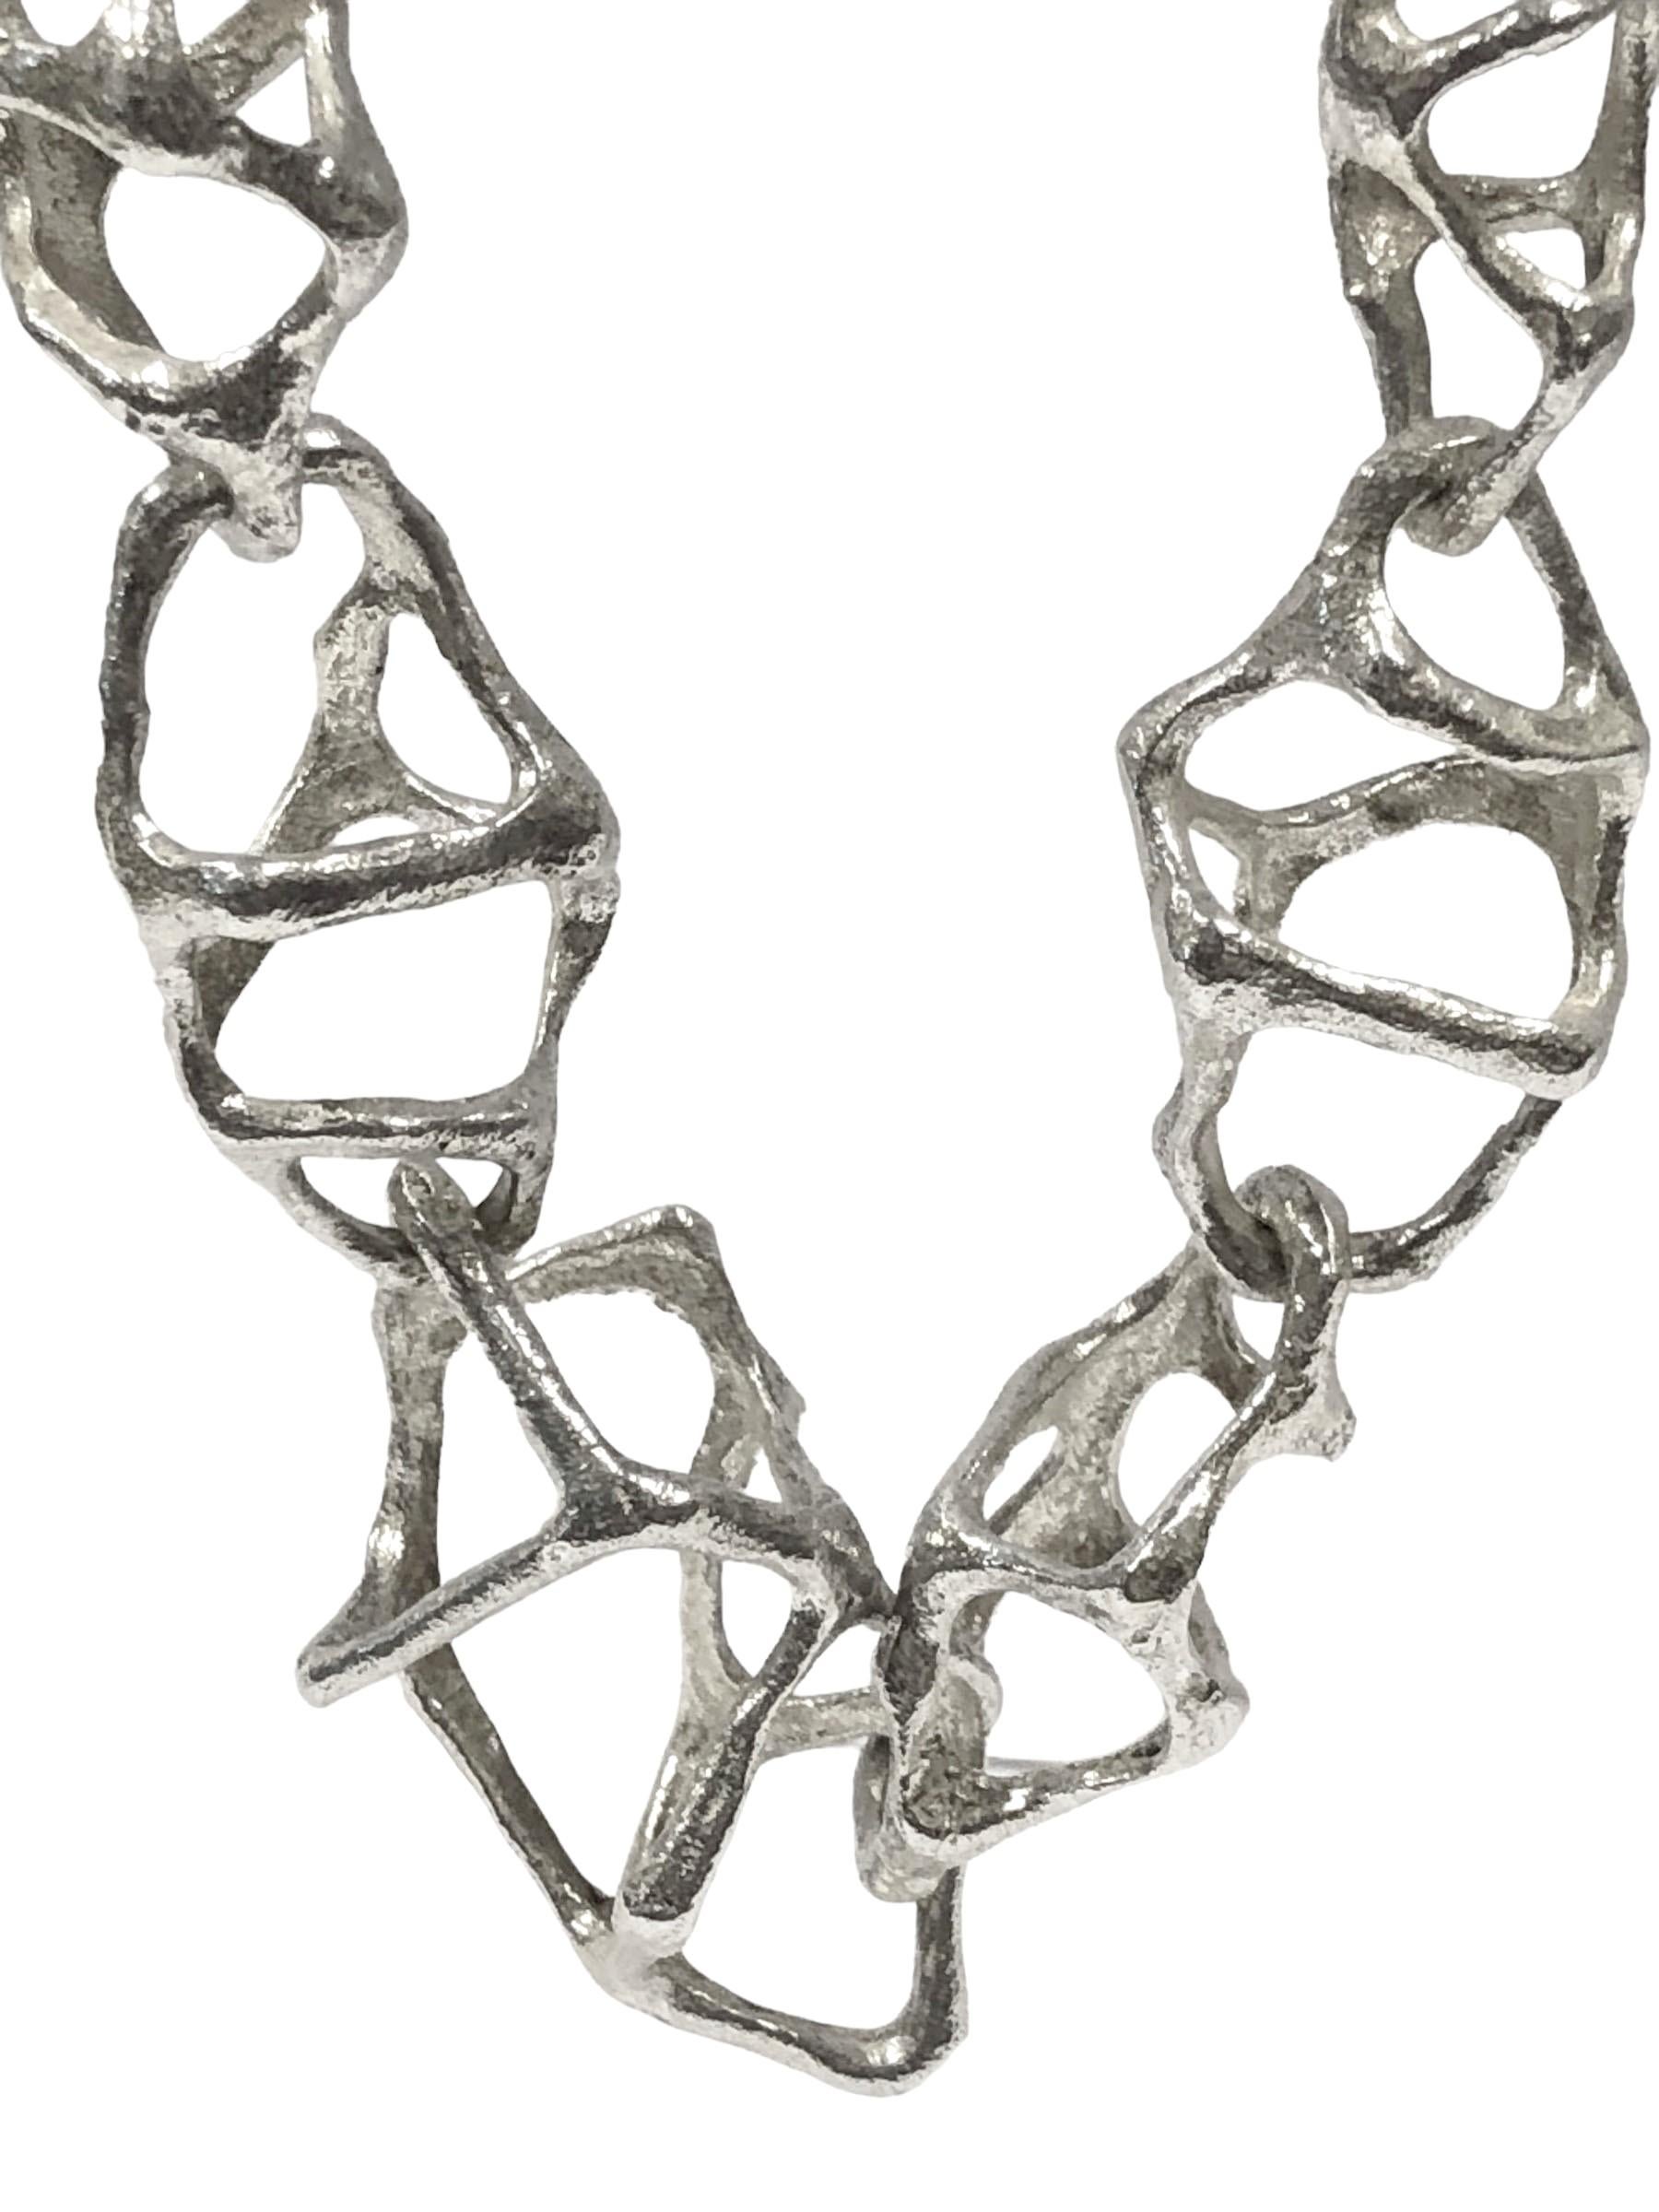 Circa 1980s Uno A Arre .835 Silver Moderninst / Brutalist link Necklace, measuring 21 1/2 inches in length with open textured links tapering in size from 3/4 down to 1/4 inch wide, weighing 86 Grams, a well made impressive piece of wearable art.